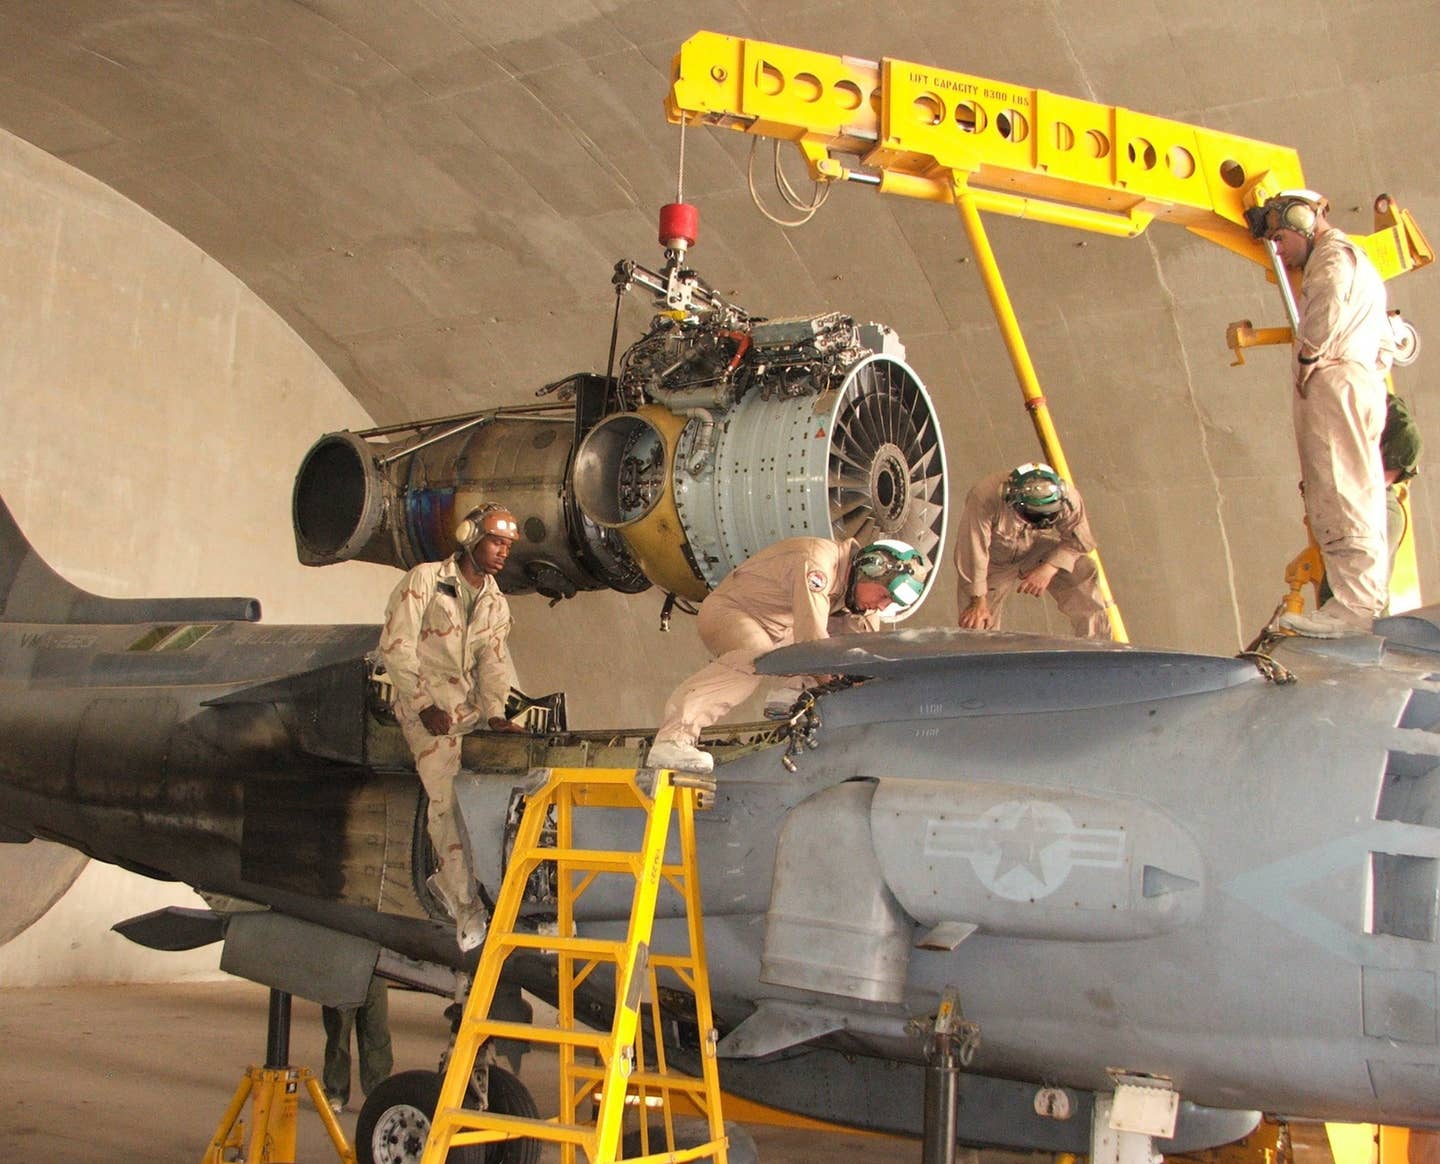 Marines with Marine Attack Squadron 223 (VMA-223) change the engine on an AV-8B Harrier II. In this image, the forward nozzle is deflected fully downward, while the rear nozzle is deflected fully backward for forward flight. <em>U.S. Marine Corps</em>